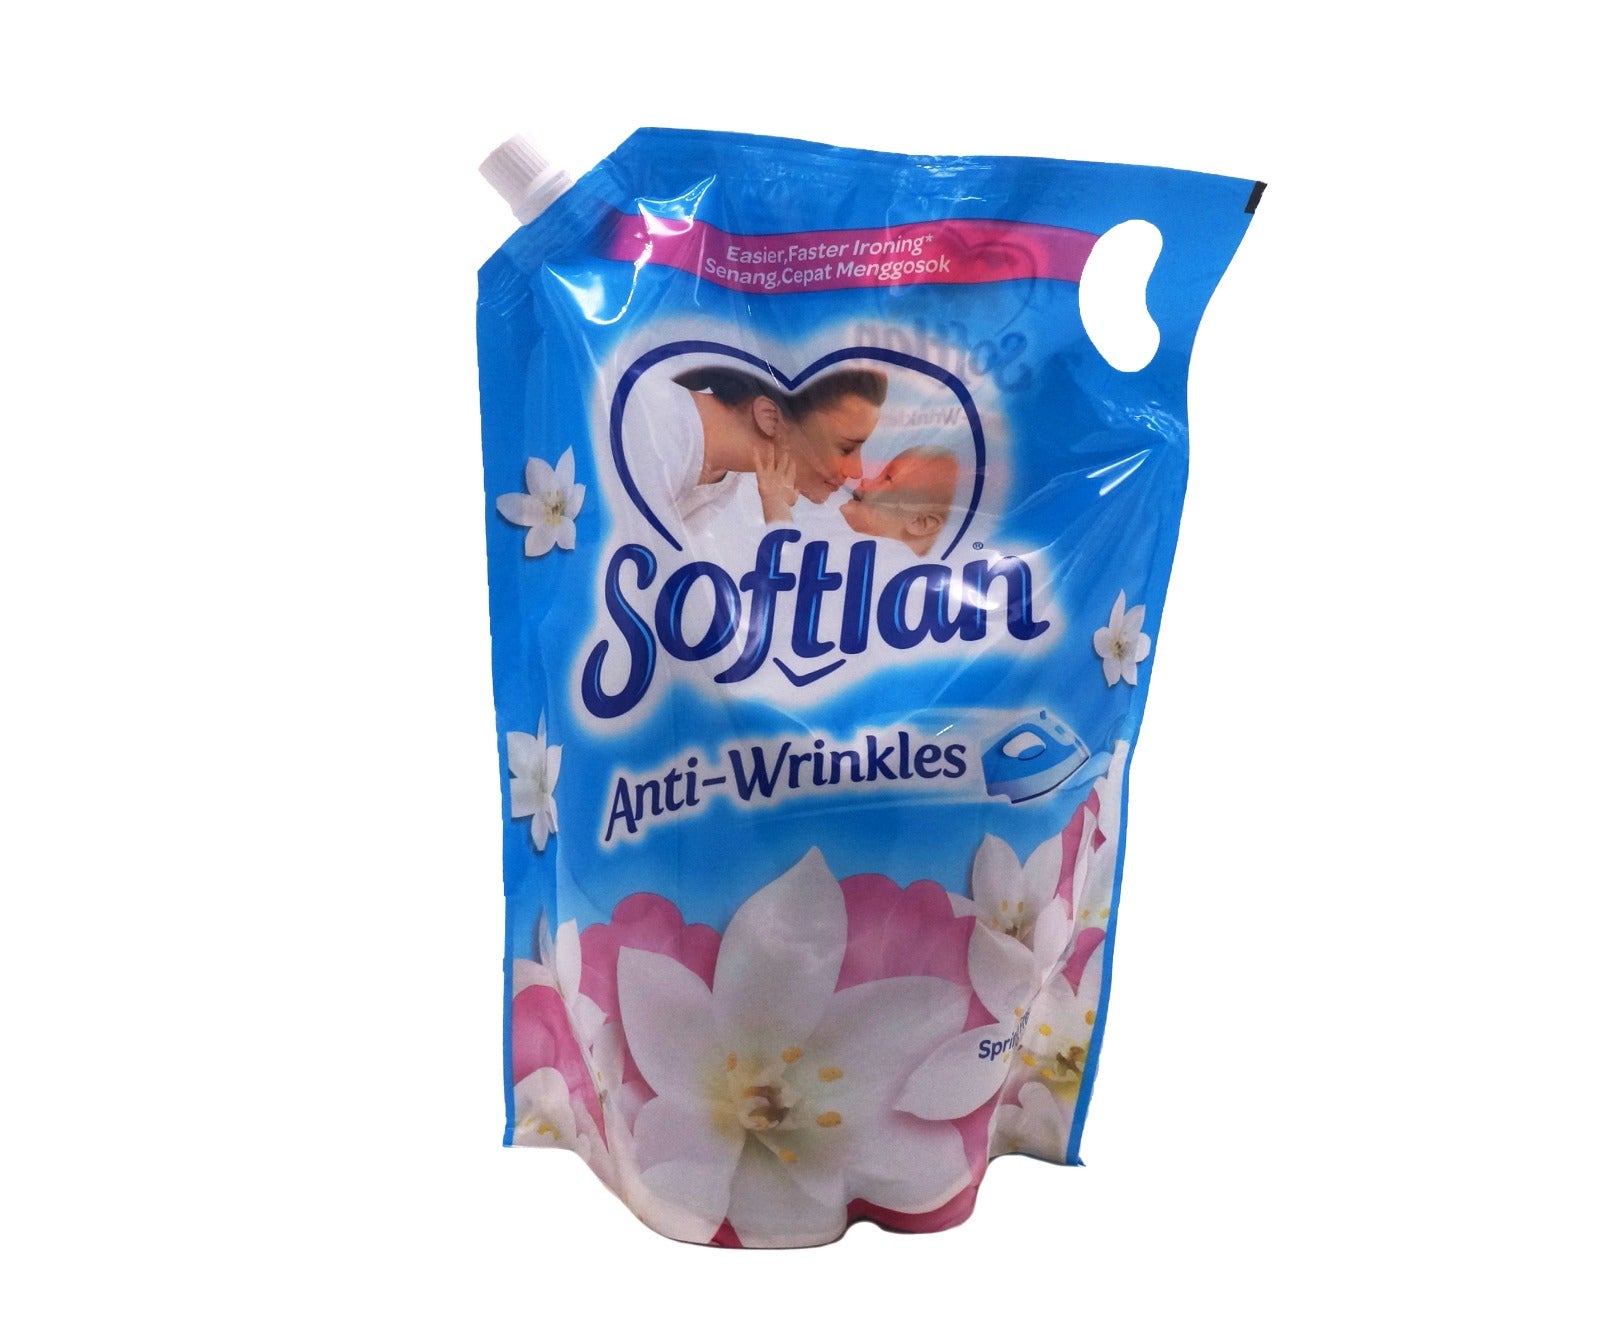 Softlan Anti-Wrinkles Fabric Conditioner Refill Pack - Spring Fresh (1.4L – Piece)